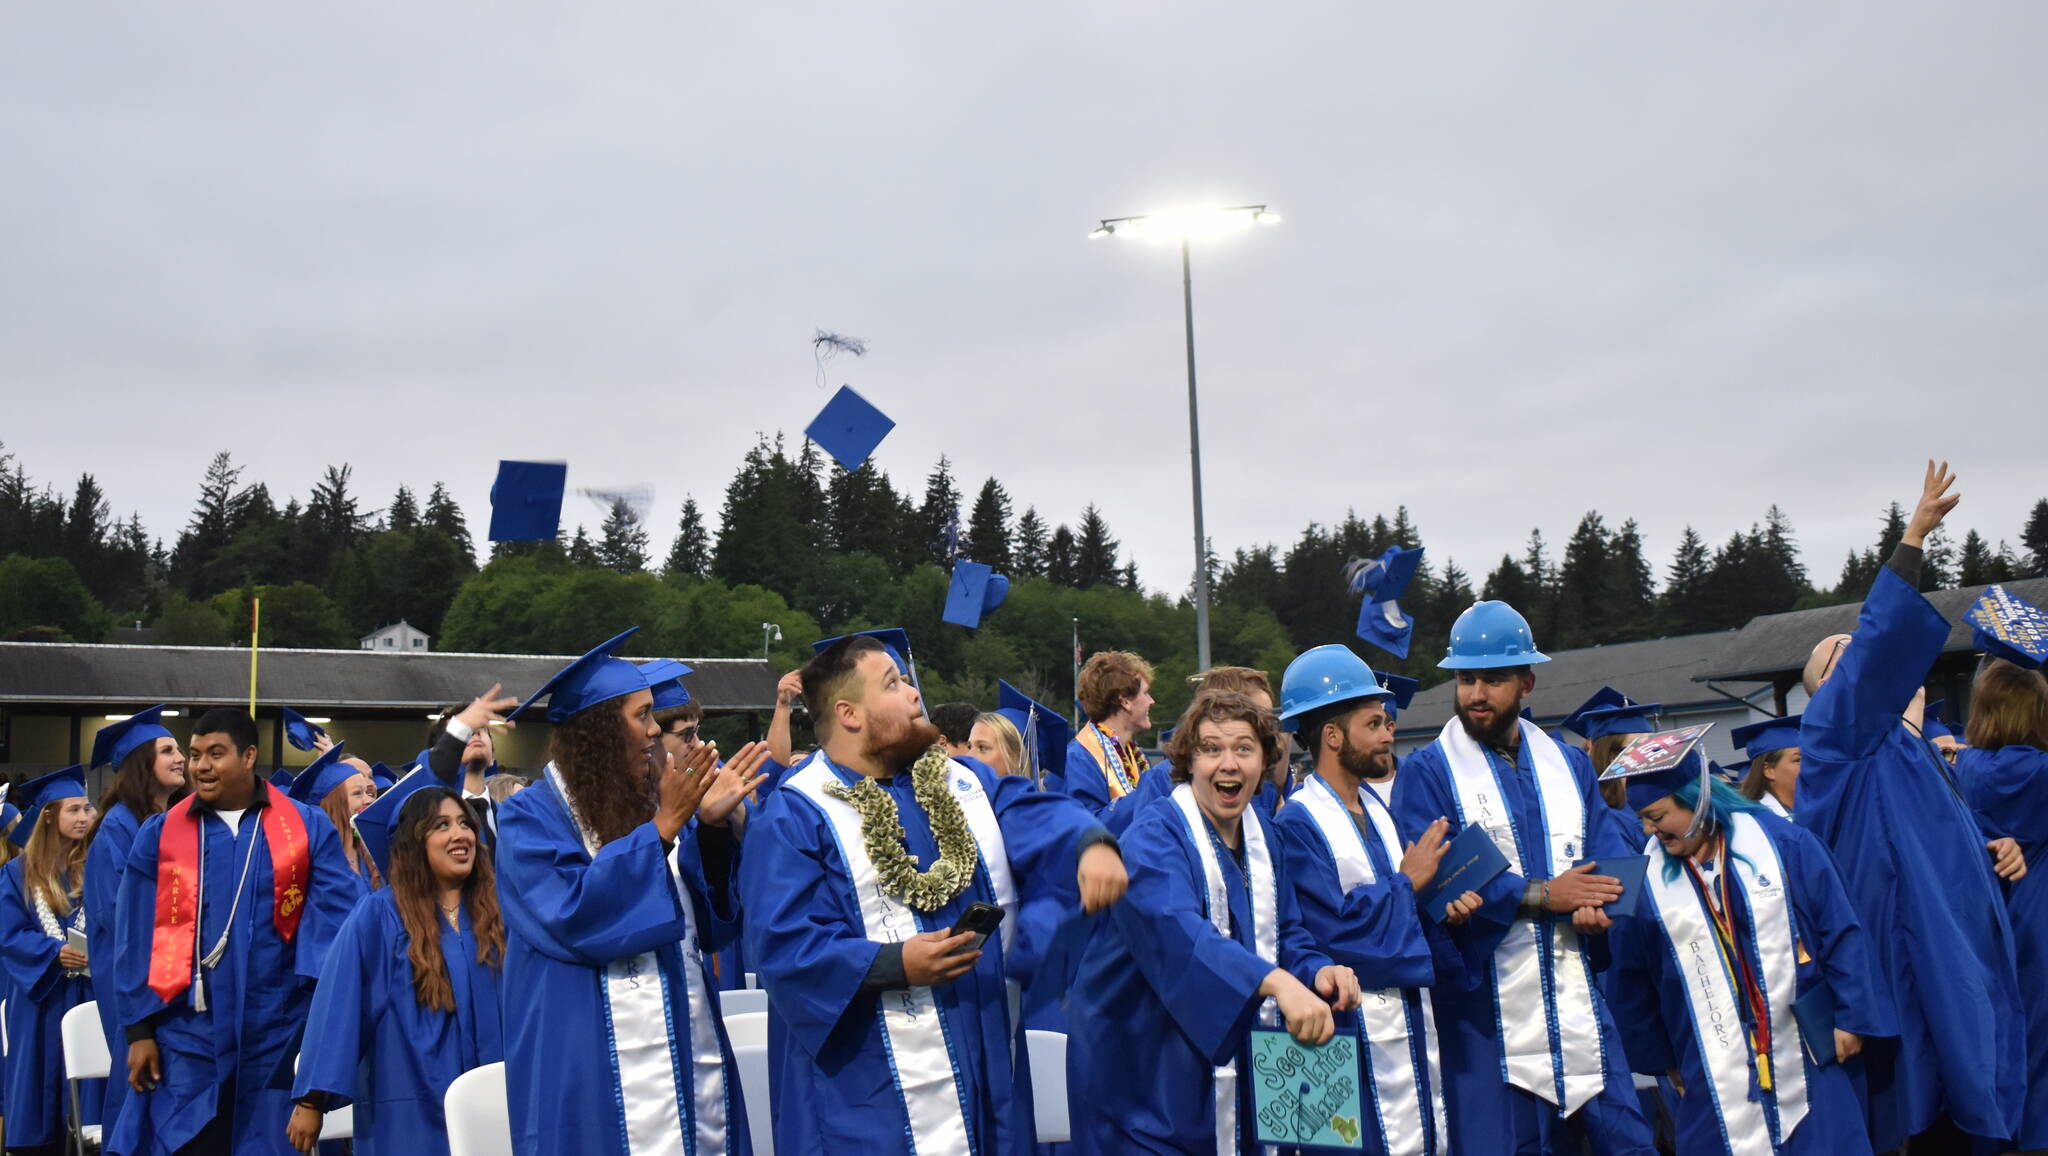 Clayton Franke / The Daily World
Graduates of Grays Harbor College toss their hats in the air after the completion of the GHC commencement ceremony on Friday, June 23 at Stewart Field in Aberdeen.